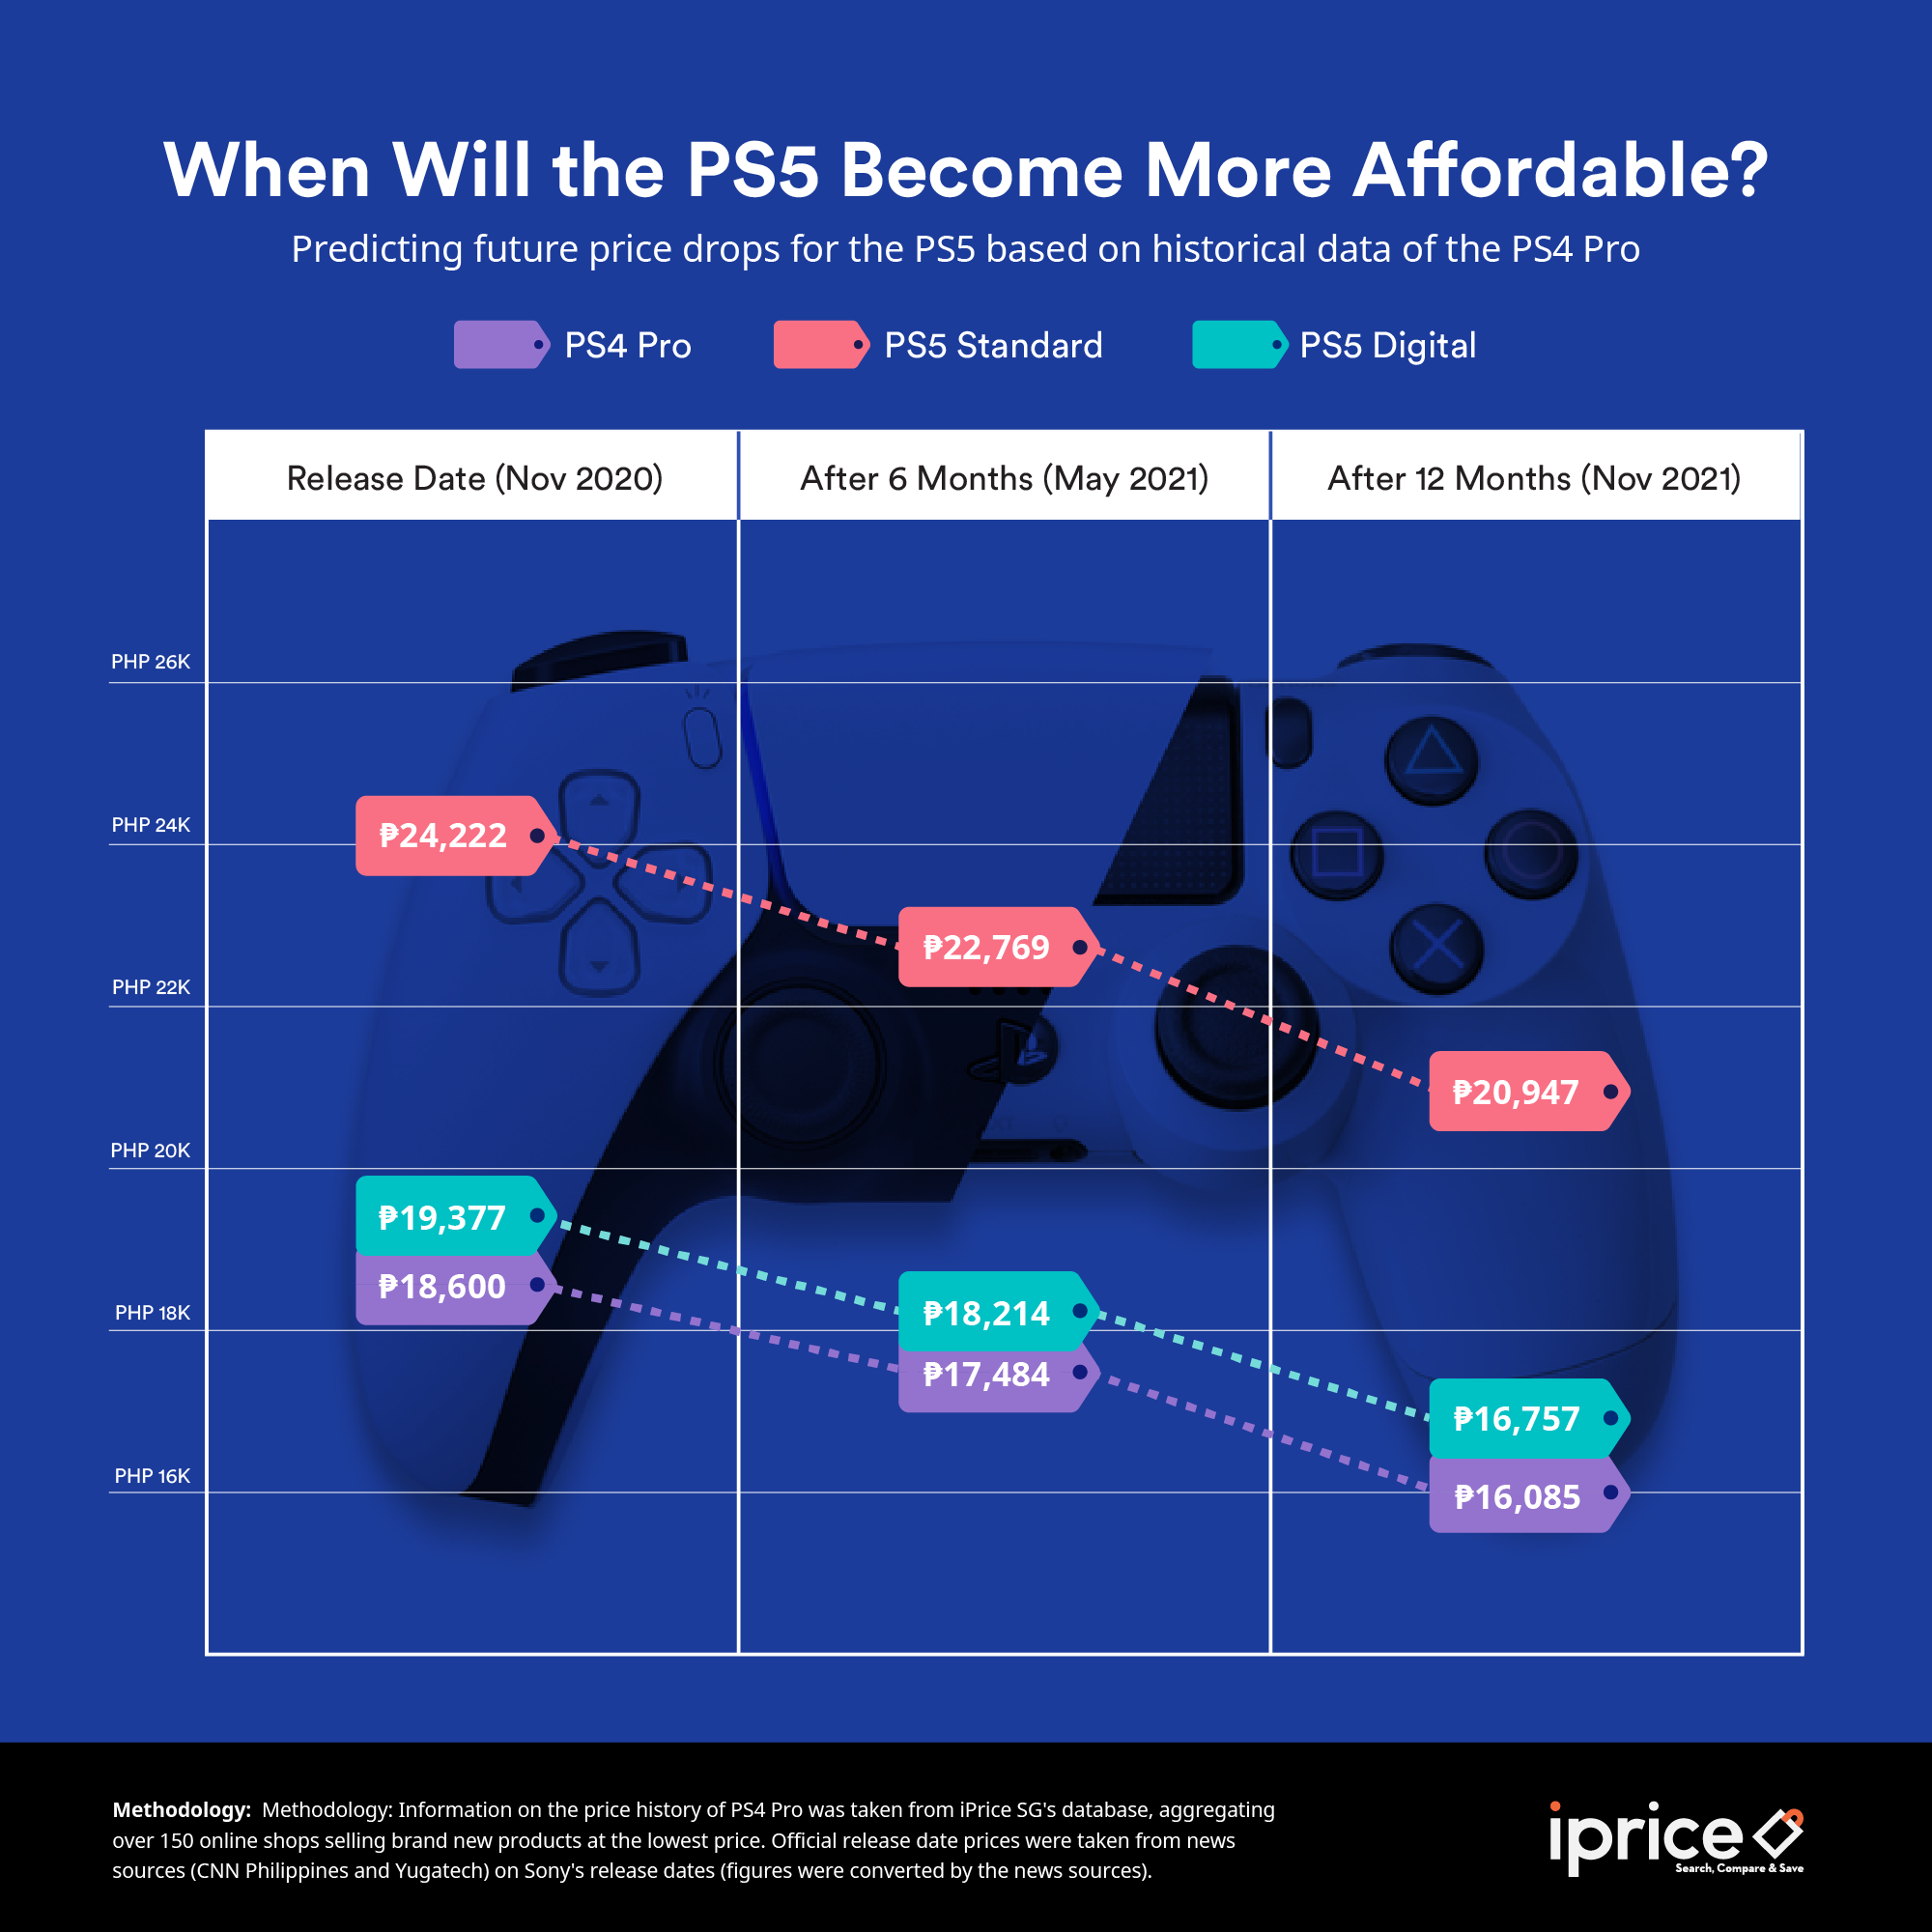 ps5 release ph